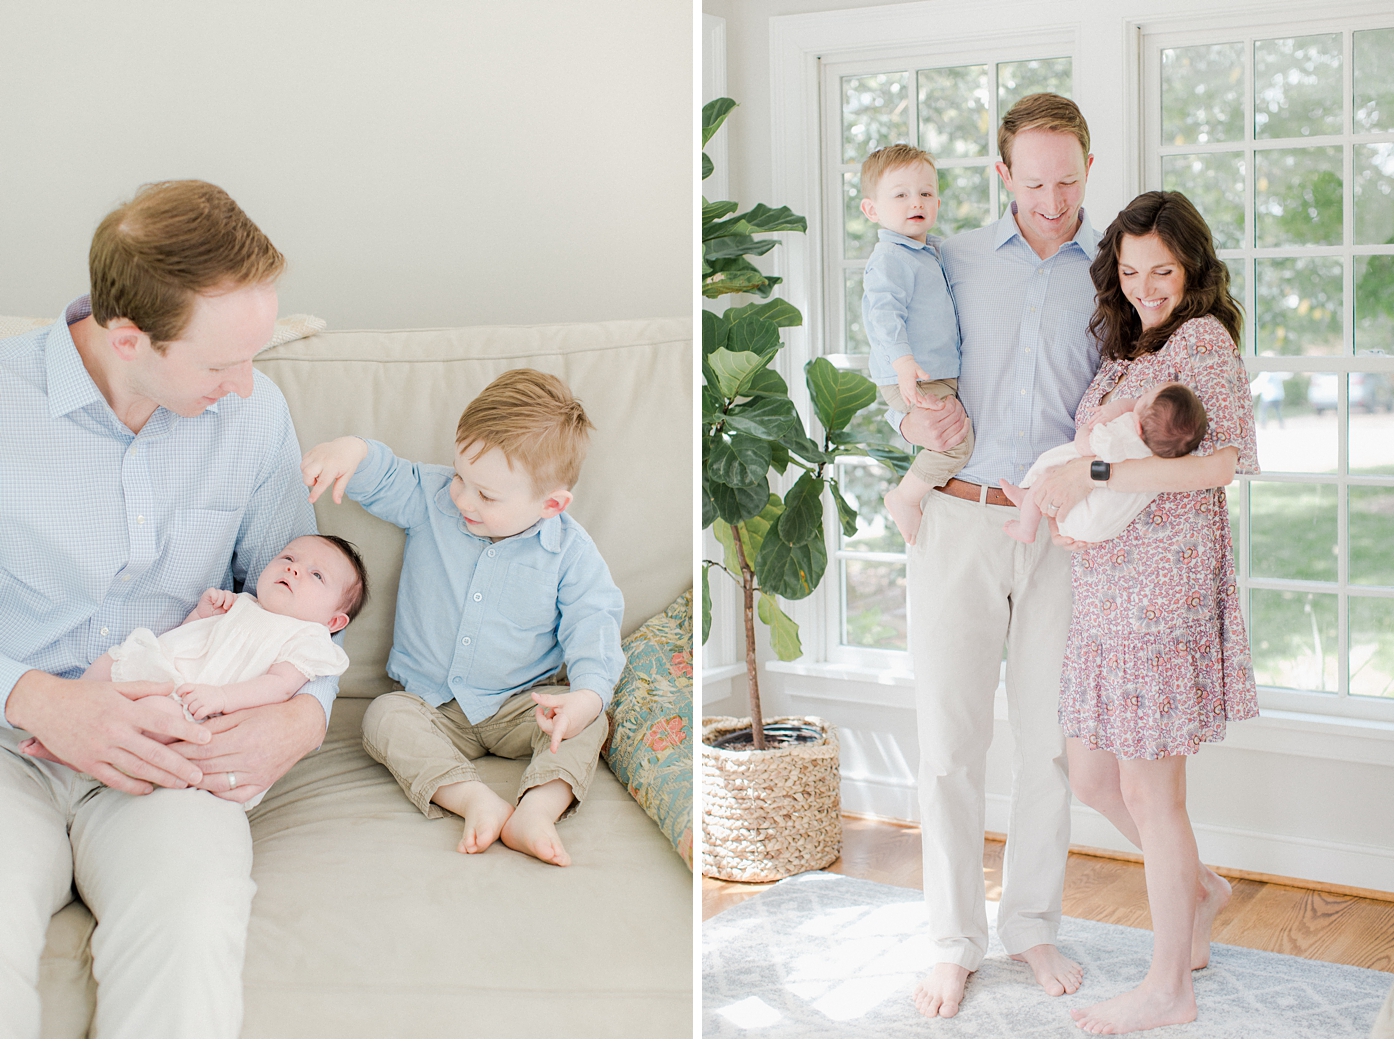 Light and Airy Lifestyle Newborn Session in Richmond Virginia by Alisandra Photography